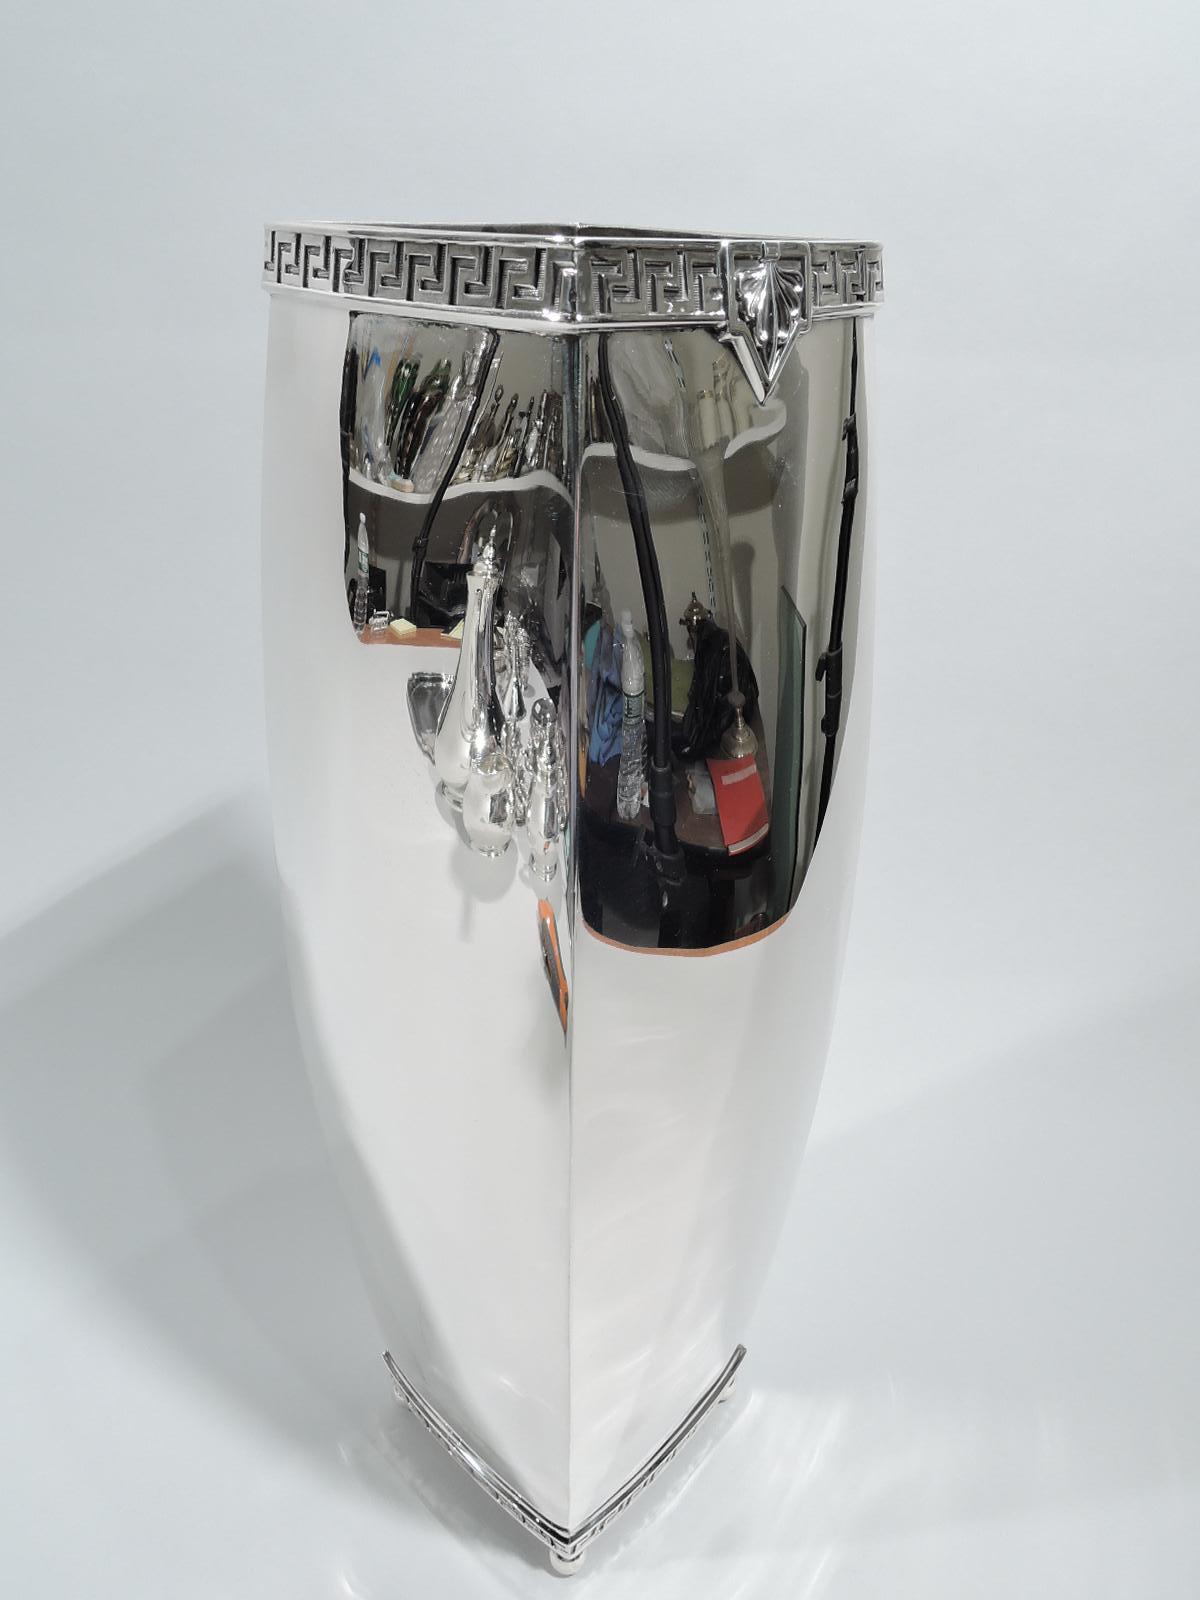 Art Deco Classical sterling silver vase. Made by Meriden Britannia (part of International) in Connecticut, ca 1920. Four curved sides with crisp corners and corner ball supports. Applied fretwork borders on lined ground at rim and base. Fully marked